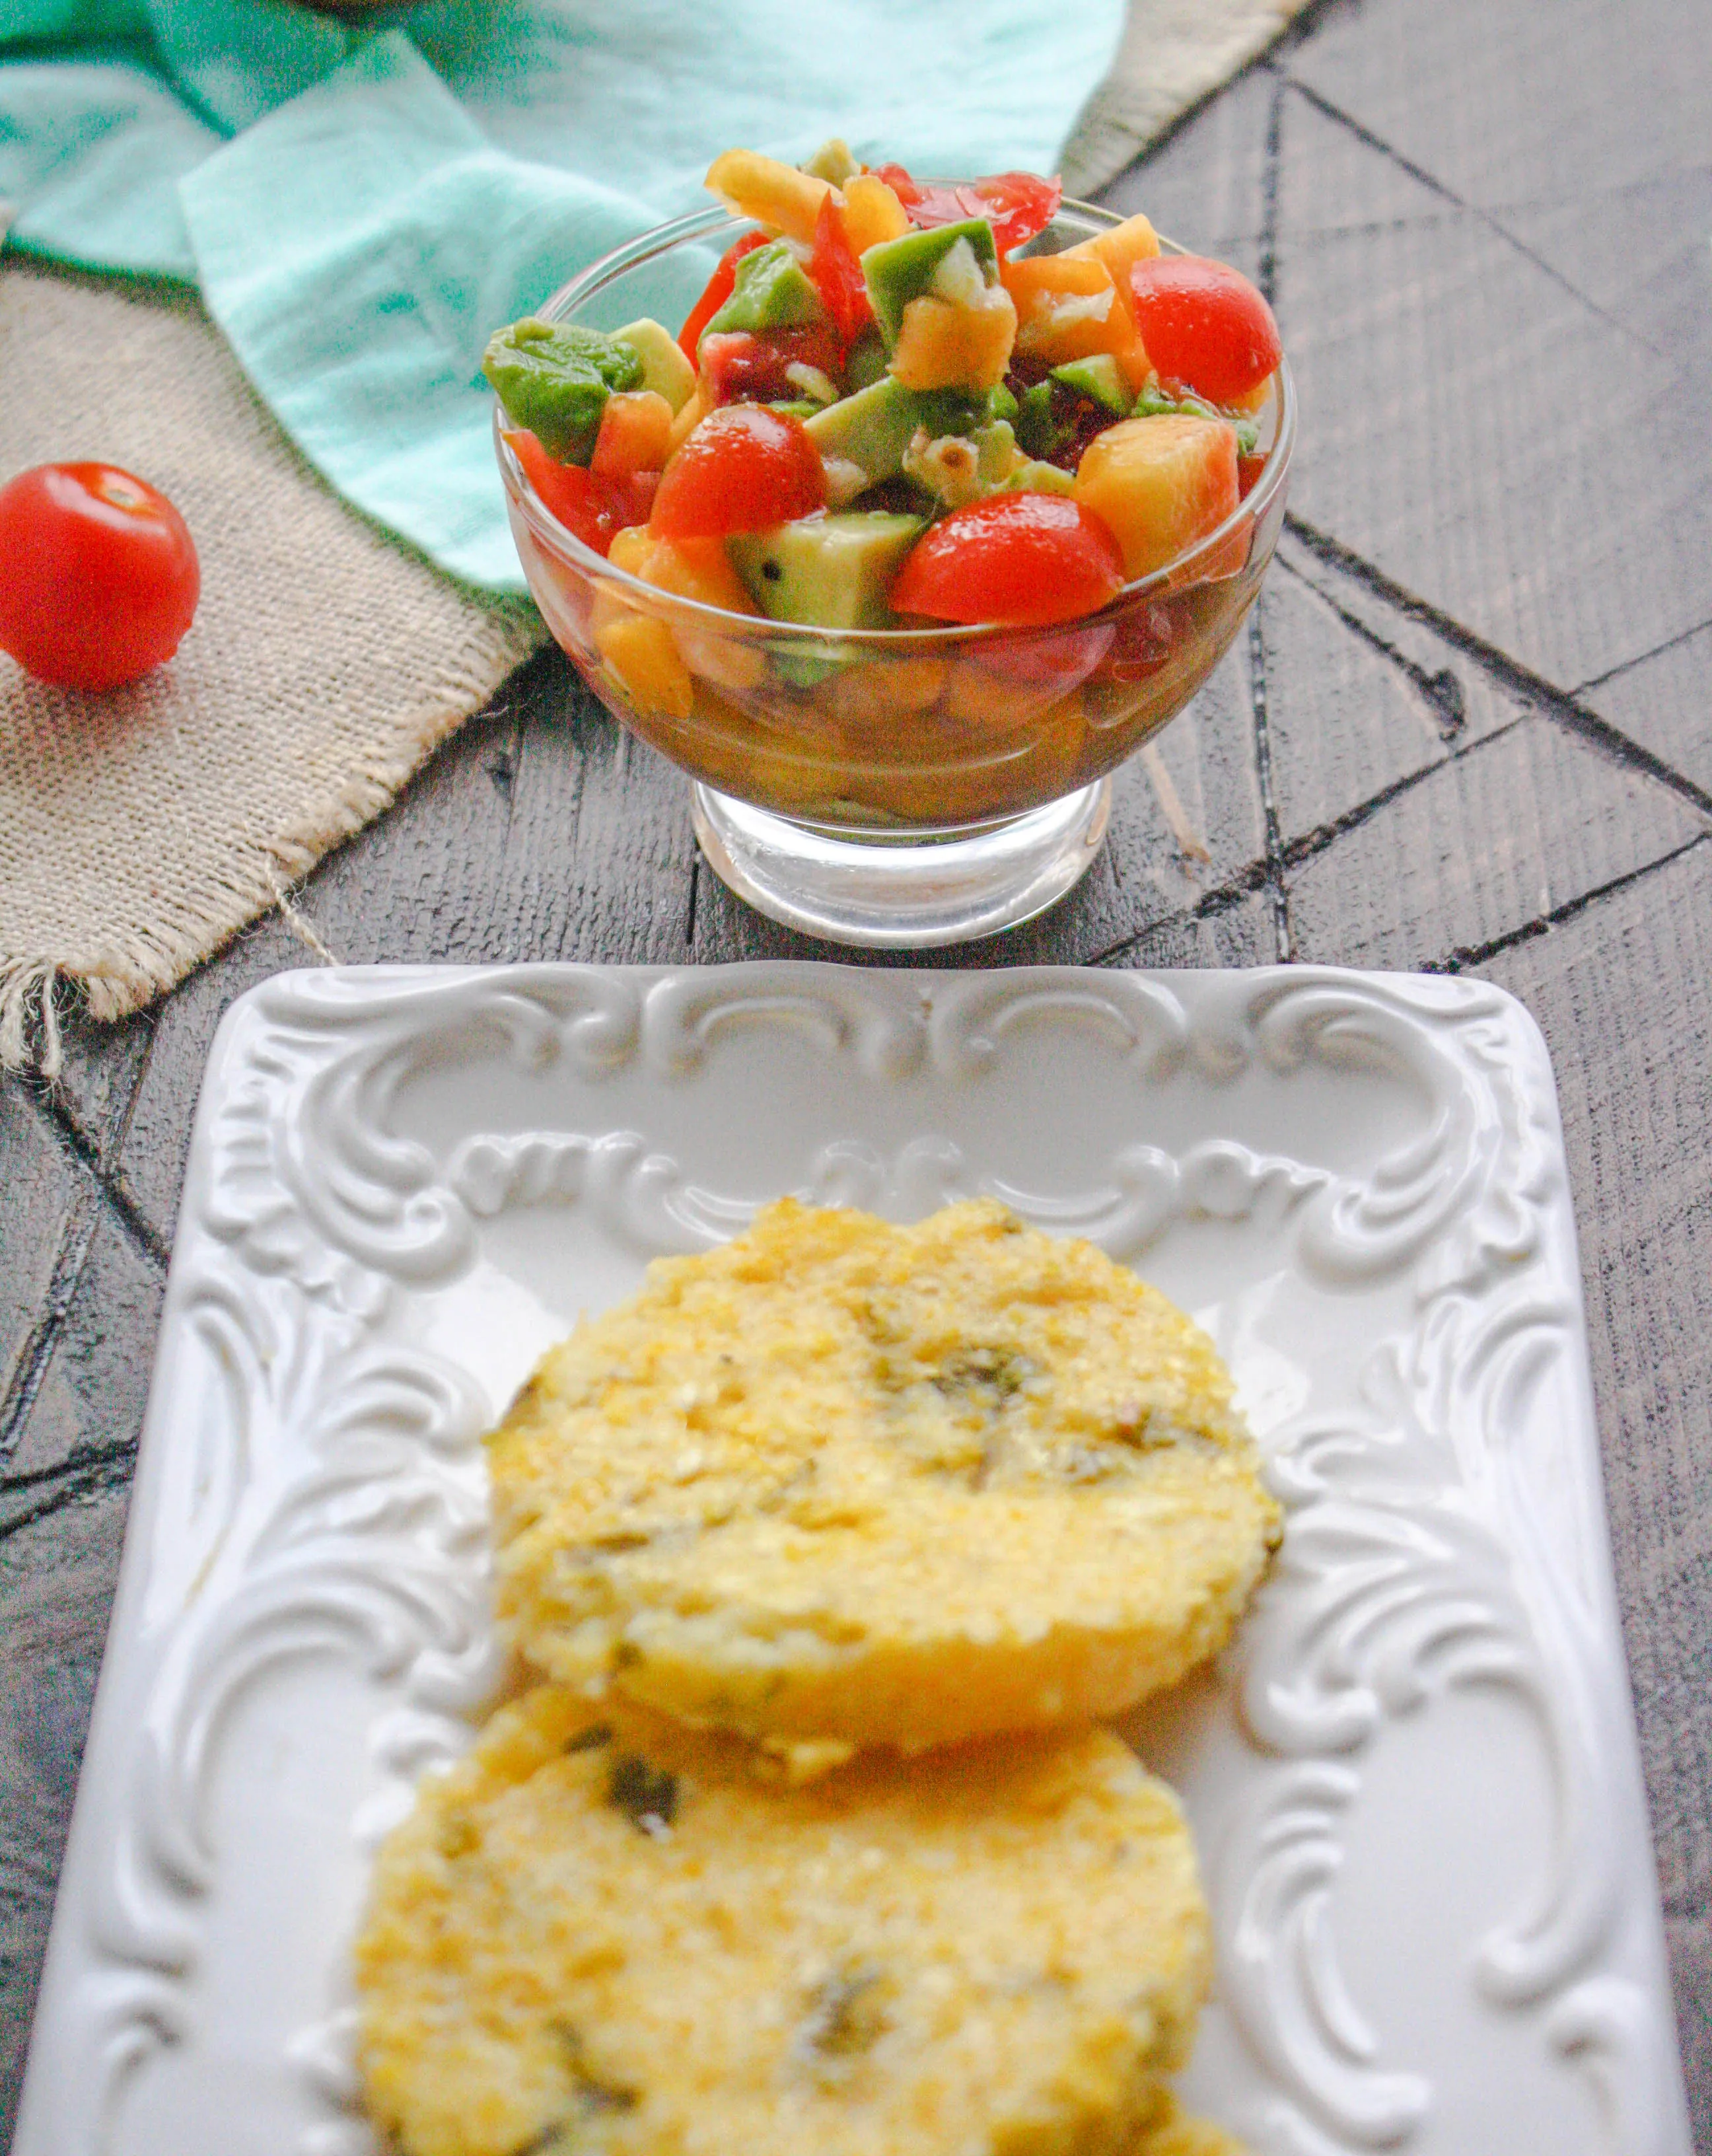 Hatch Chile Grits Cakes with Peach-Citrus Salsa includes amazing ingredients! Whip up these Hatch Chile Grits Cakes with Peach-Citrus Salsa for your next gathering.